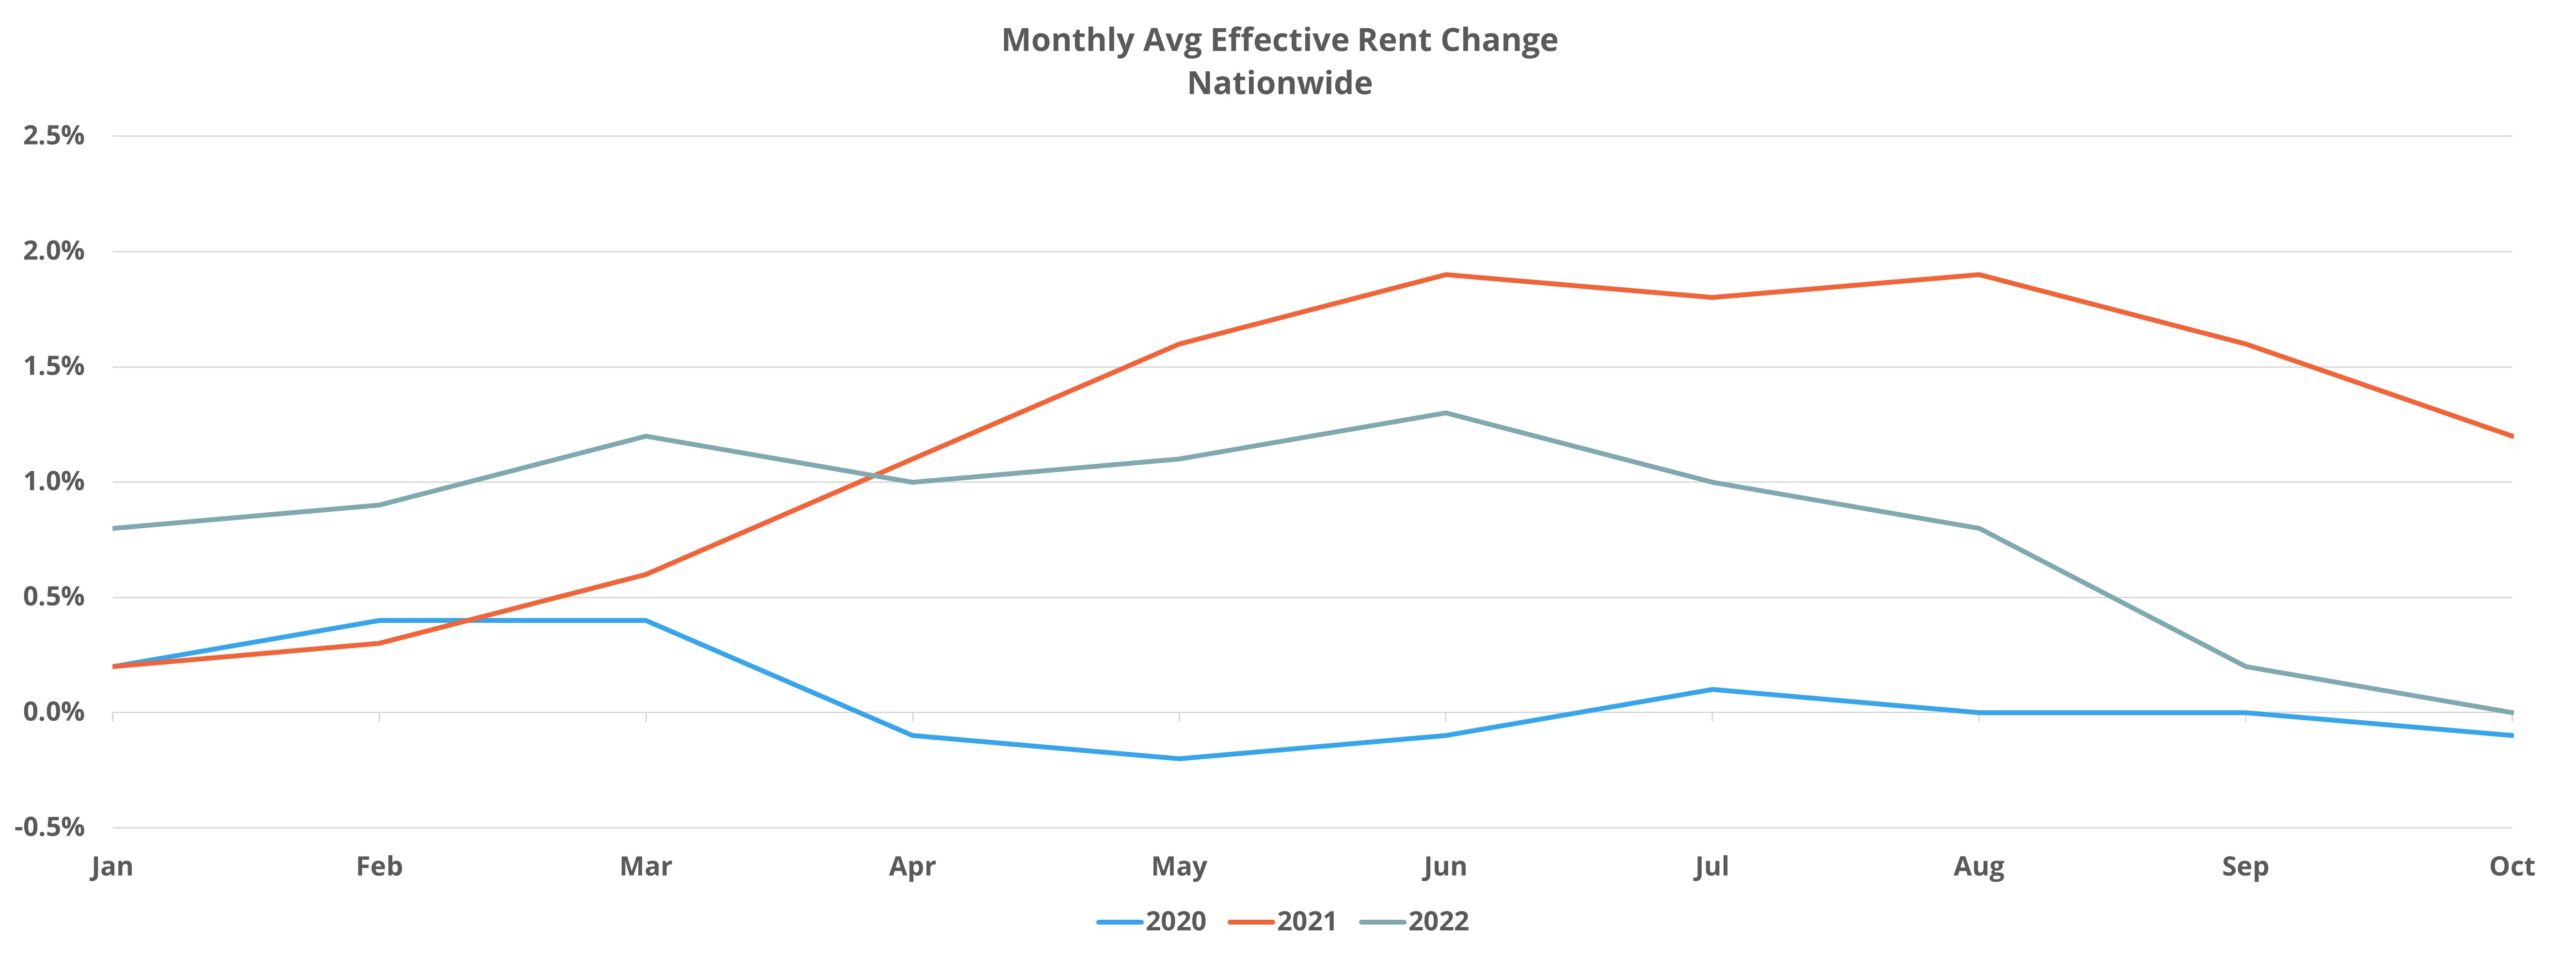 Monthly Avg Effective Rent Growth